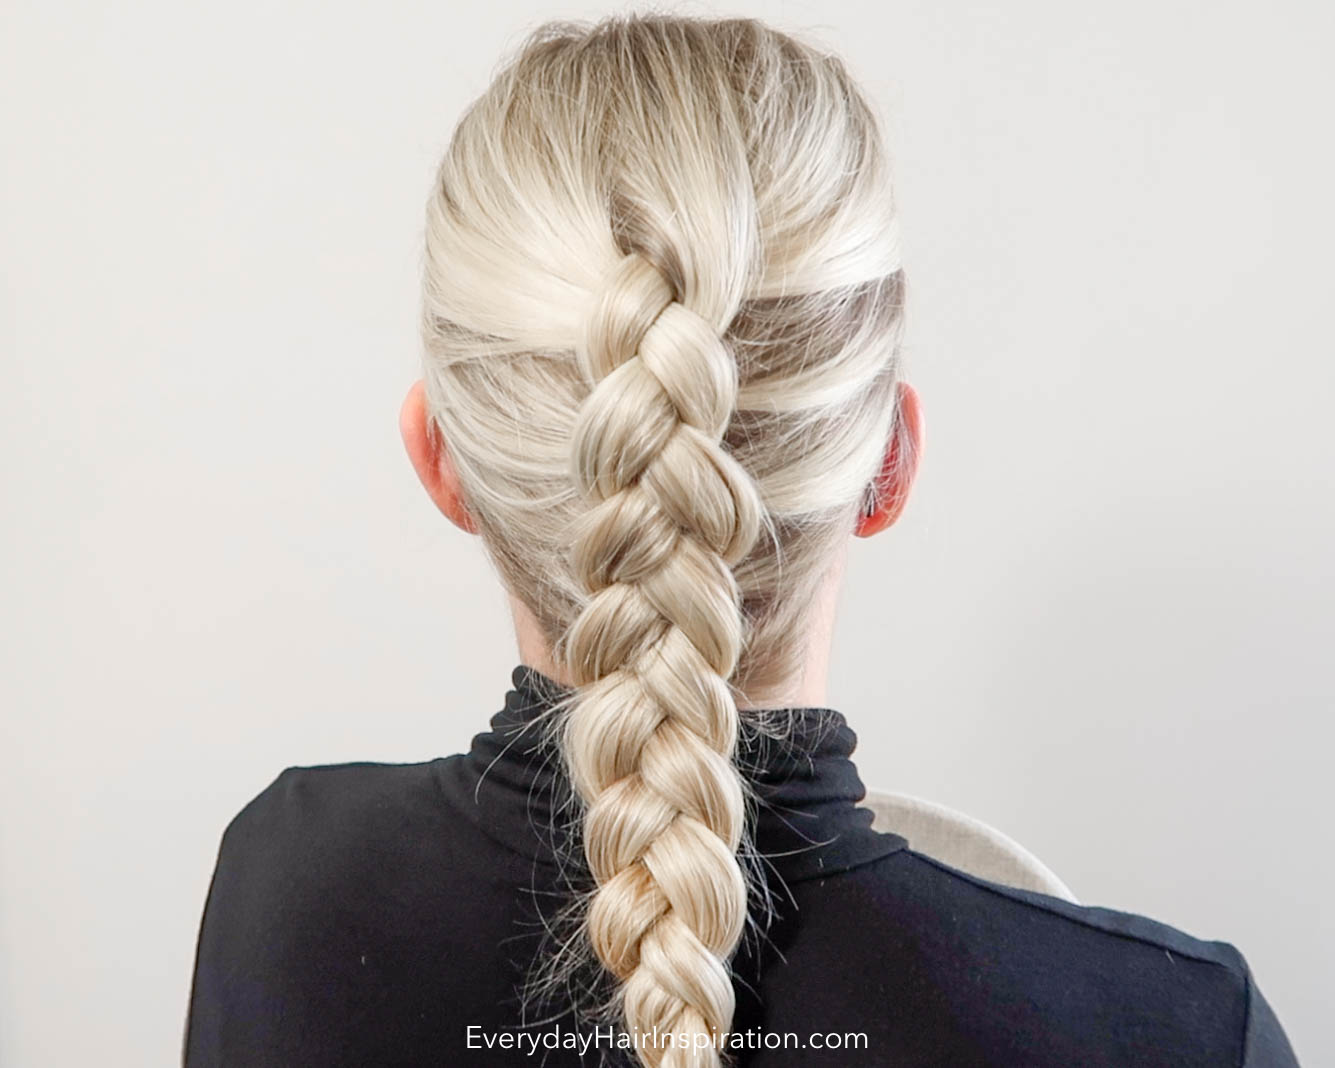 How To Dutch Braid Your Own Hair Everyday Hair Inspiration